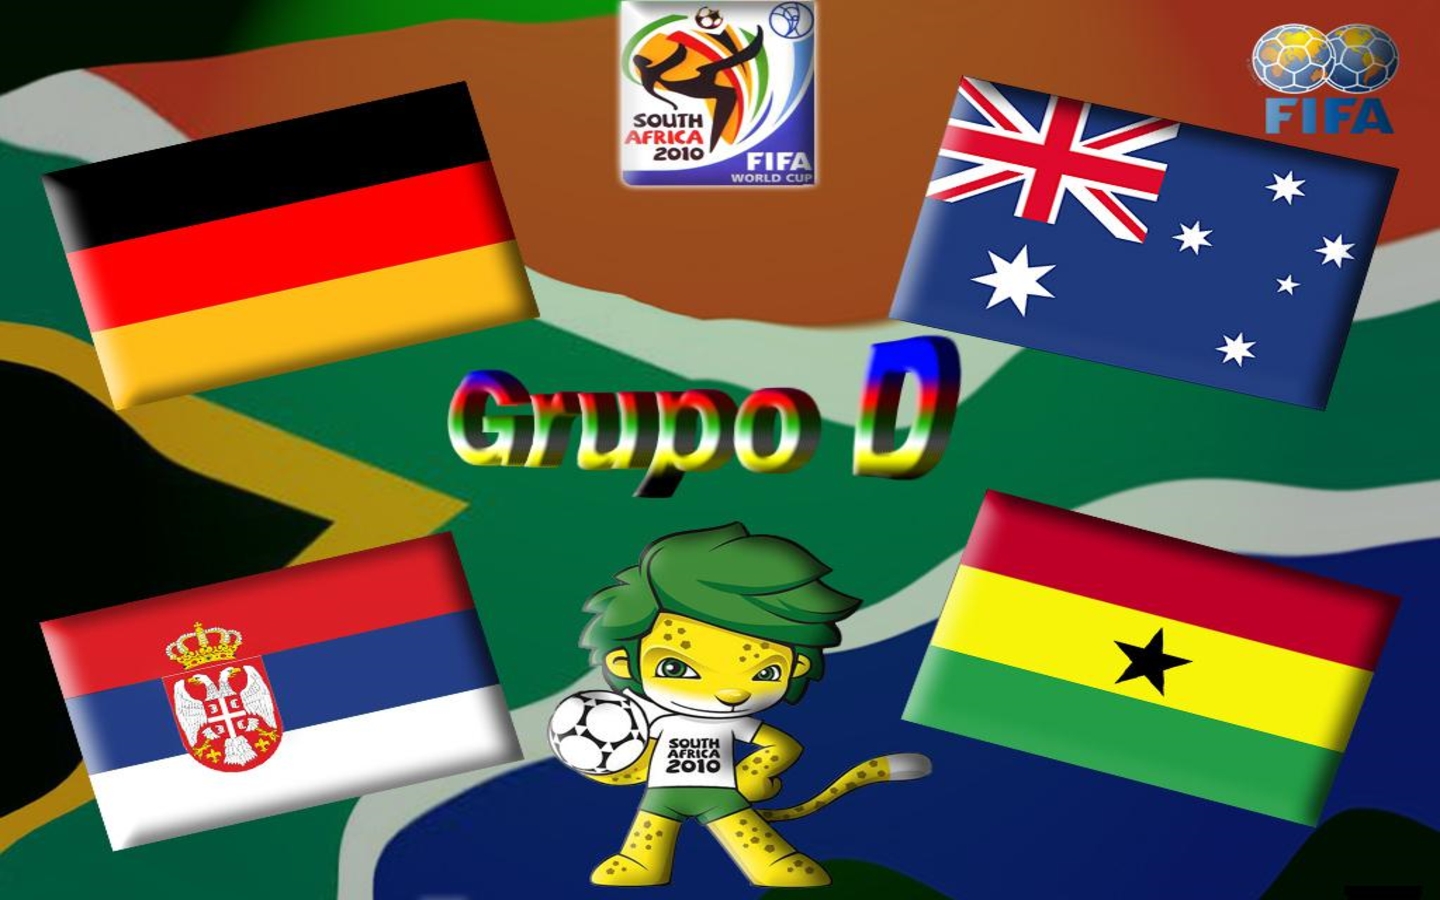 World cup 2010